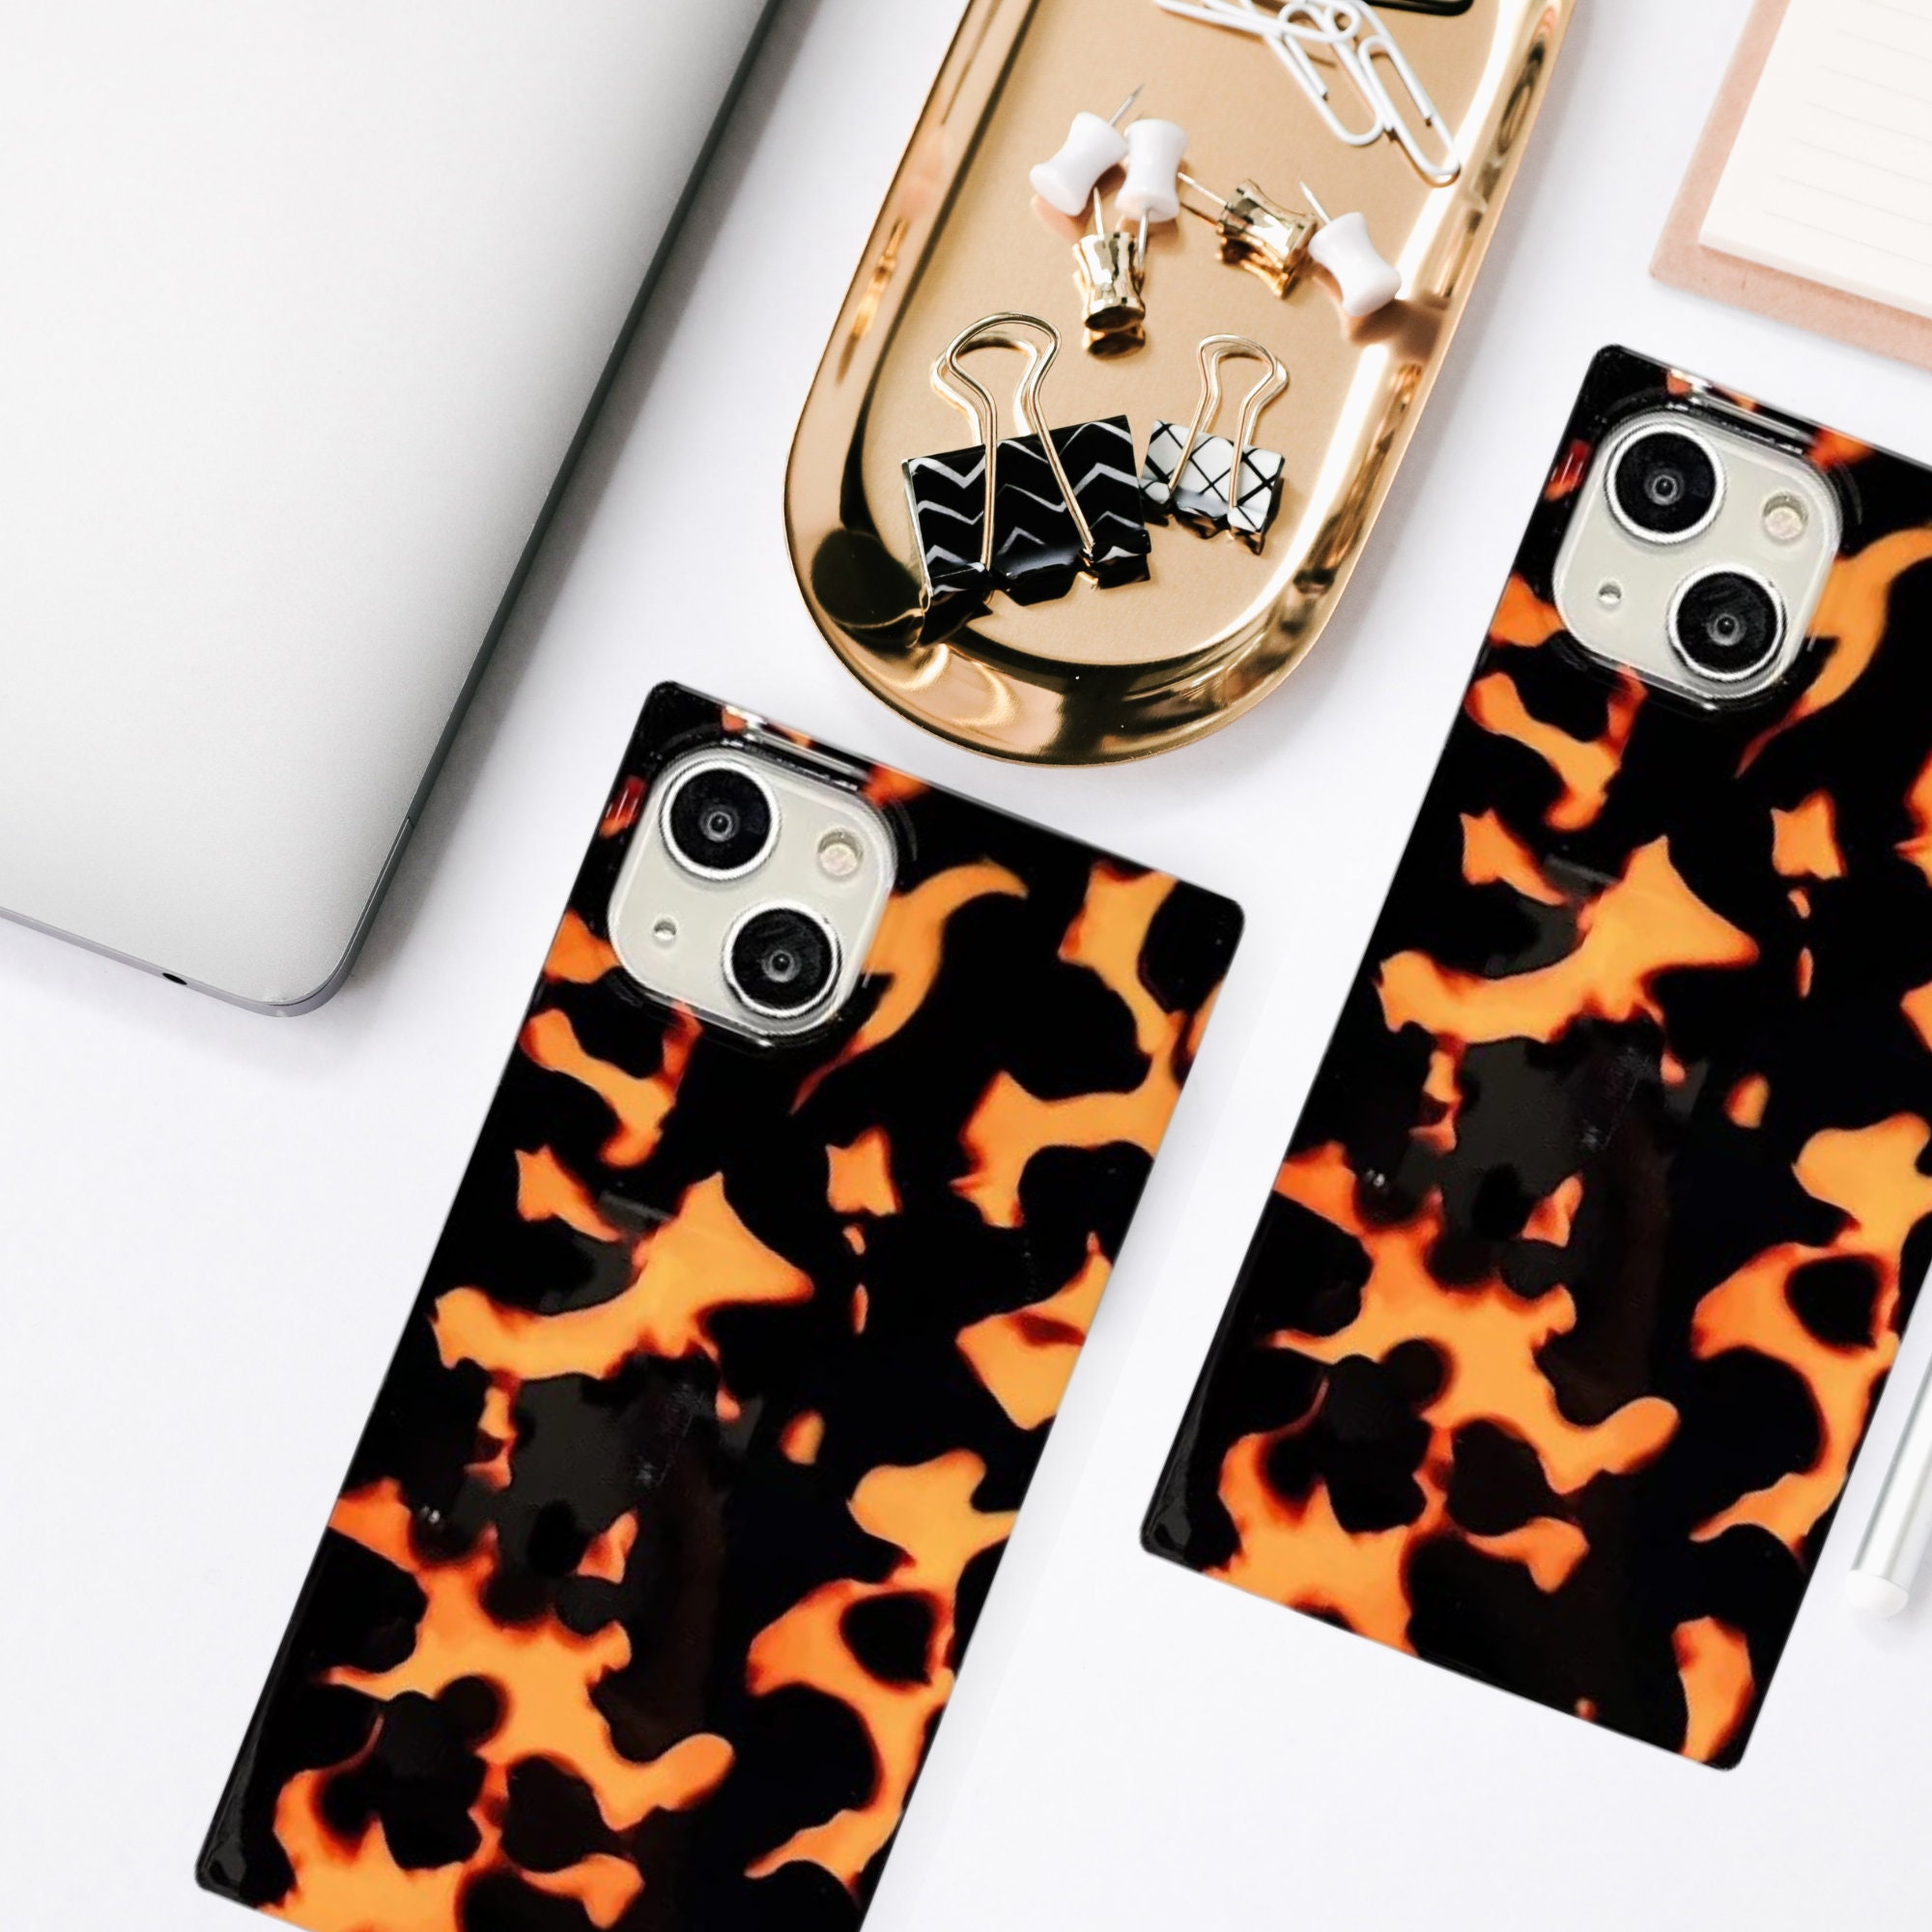 Square Case Compatible iPhone XR Gold Black Marble Luxury Elegant Soft TPU  Shockproof Protective Metal Decoration Corner Back Cover Case iPhone XR